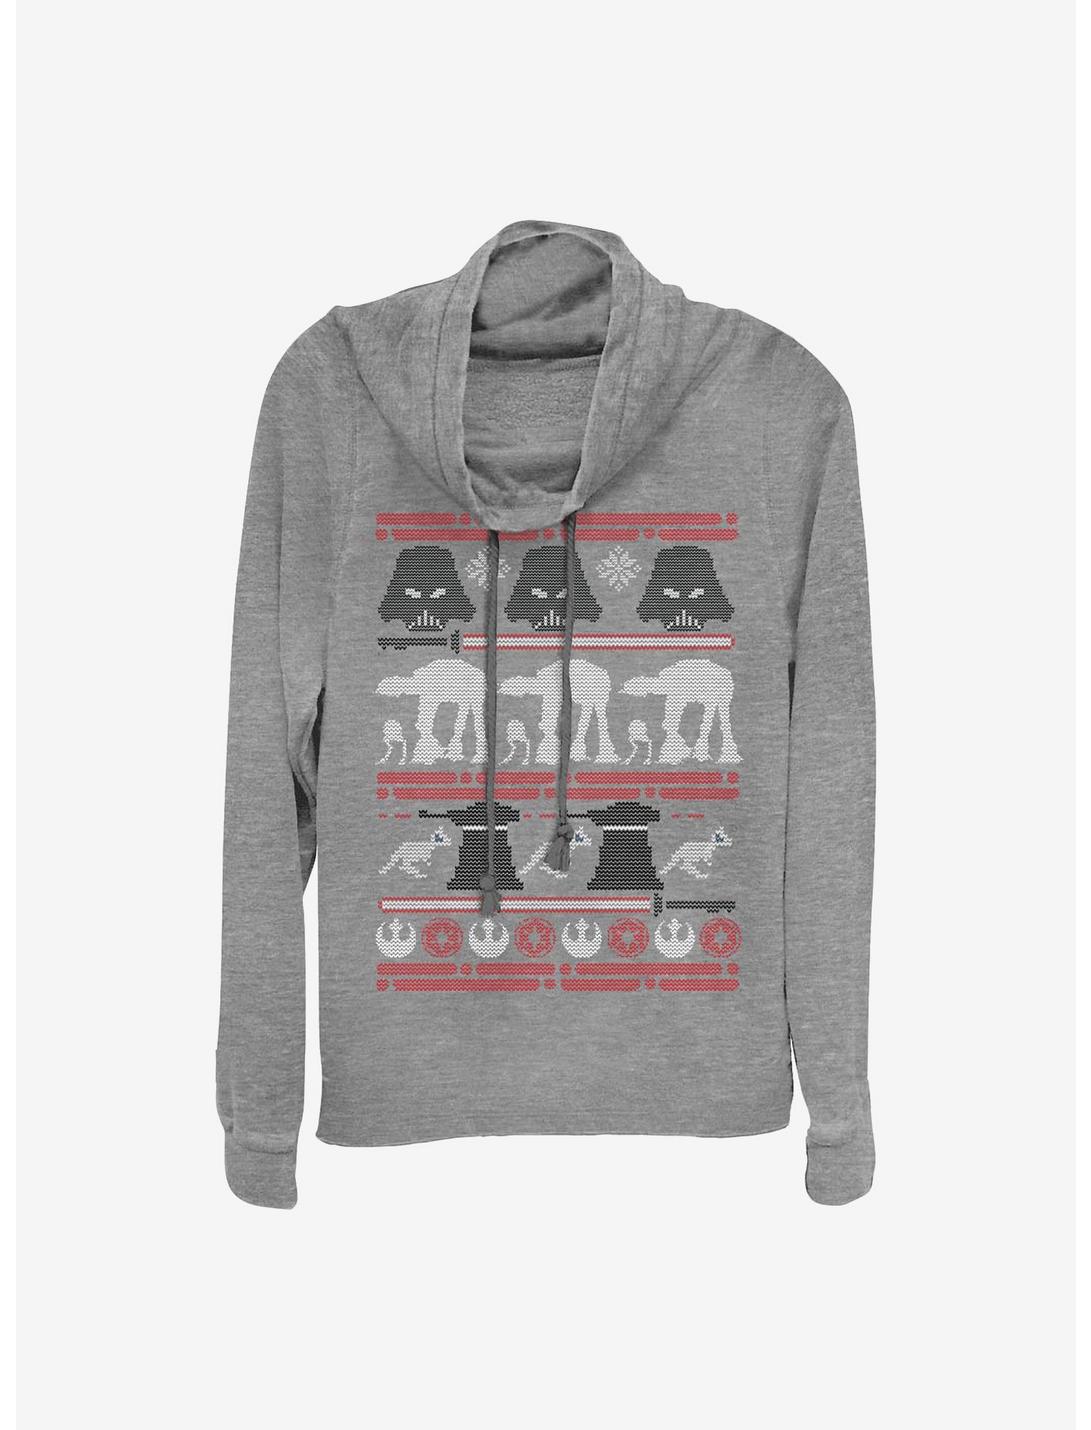 Star Wars Hoth Battle Ugly Christmas Sweater Cowl Neck Long-Sleeve Girls Top, GRAY HTR, hi-res